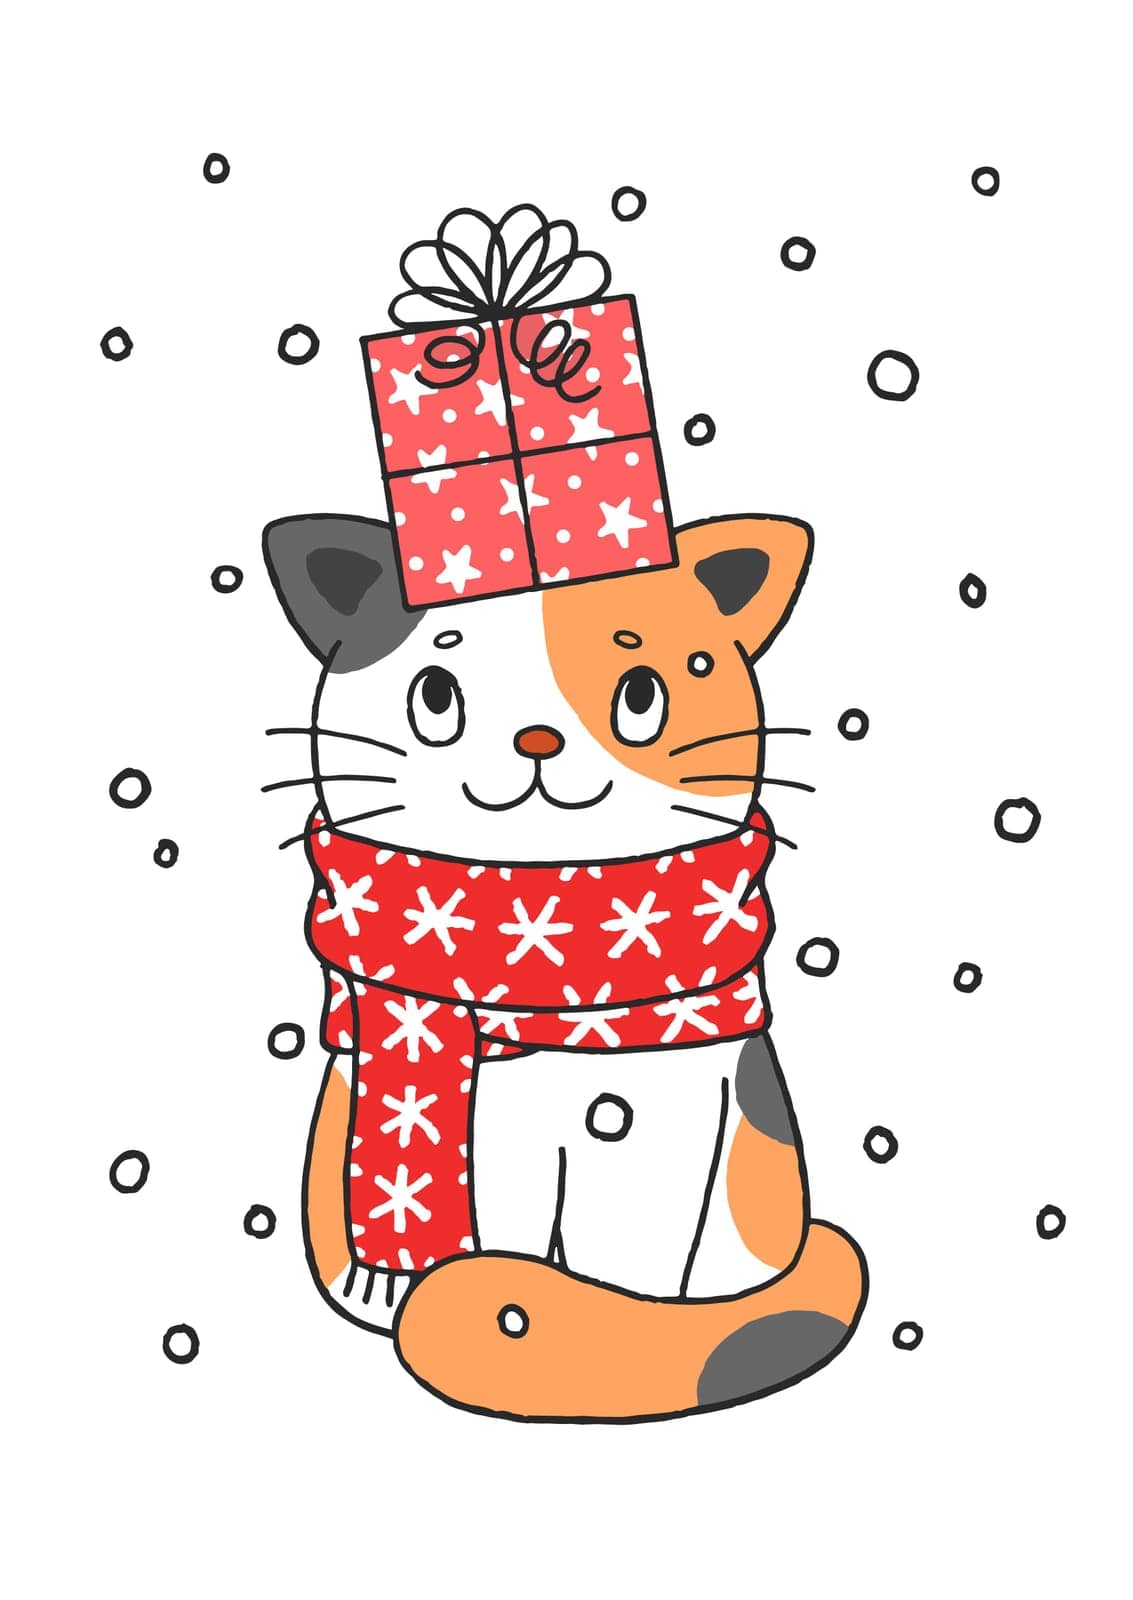 Cute Hand Drawn Christmas Kitty Cat With Present Box by JuneYap